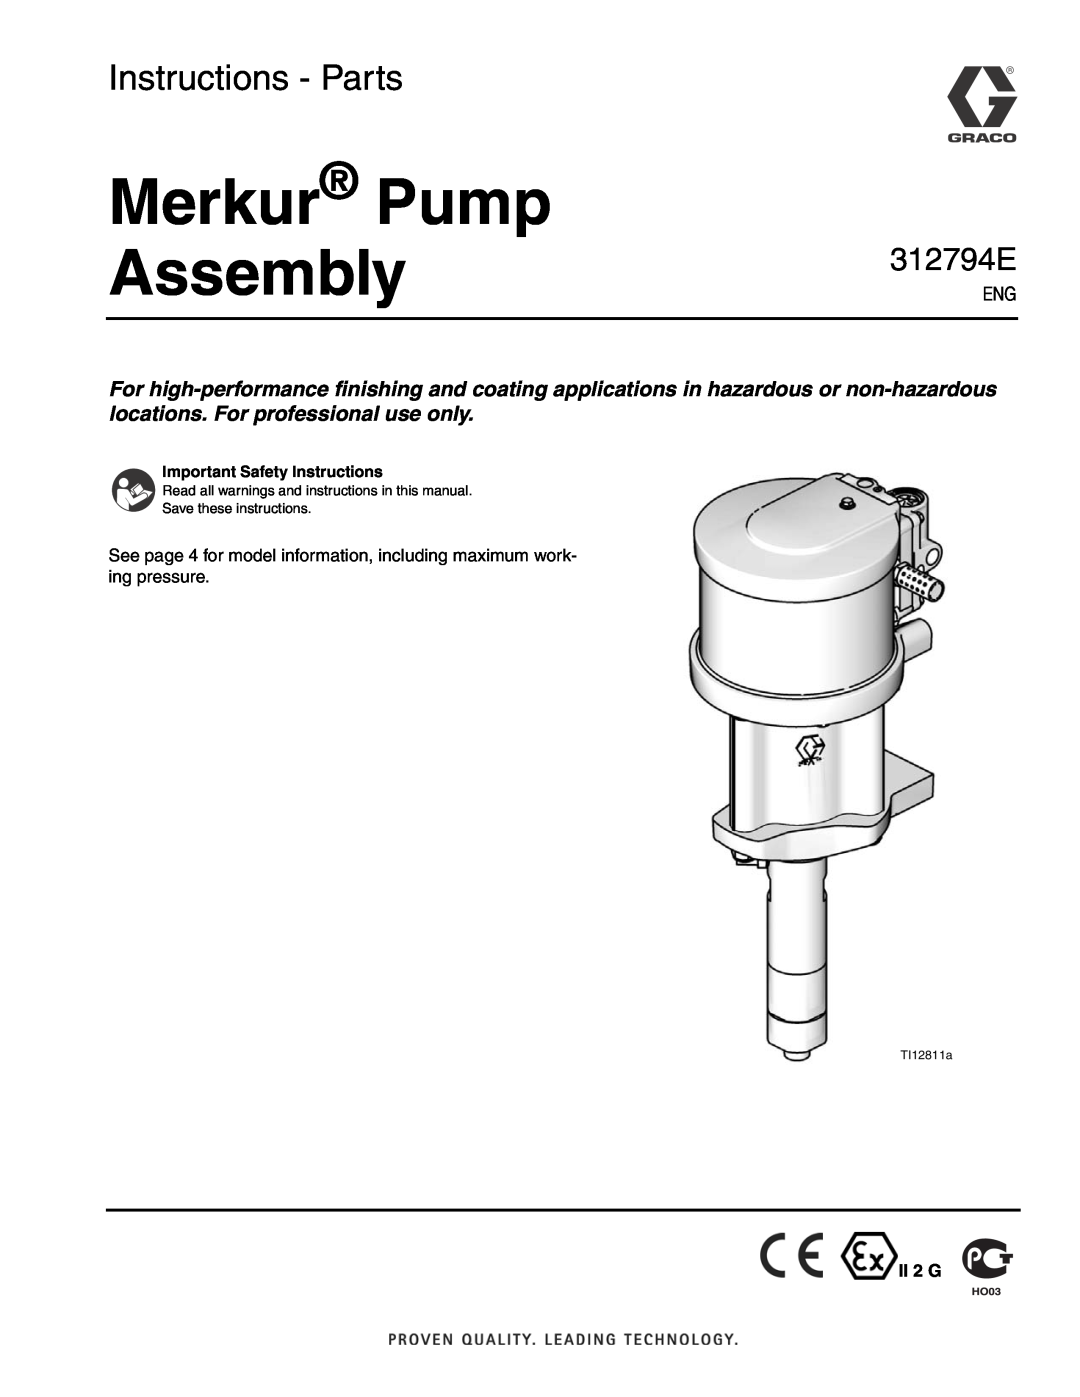 Graco 312794E important safety instructions Merkur Pump Assembly, Instructions - Parts, TI12811a 